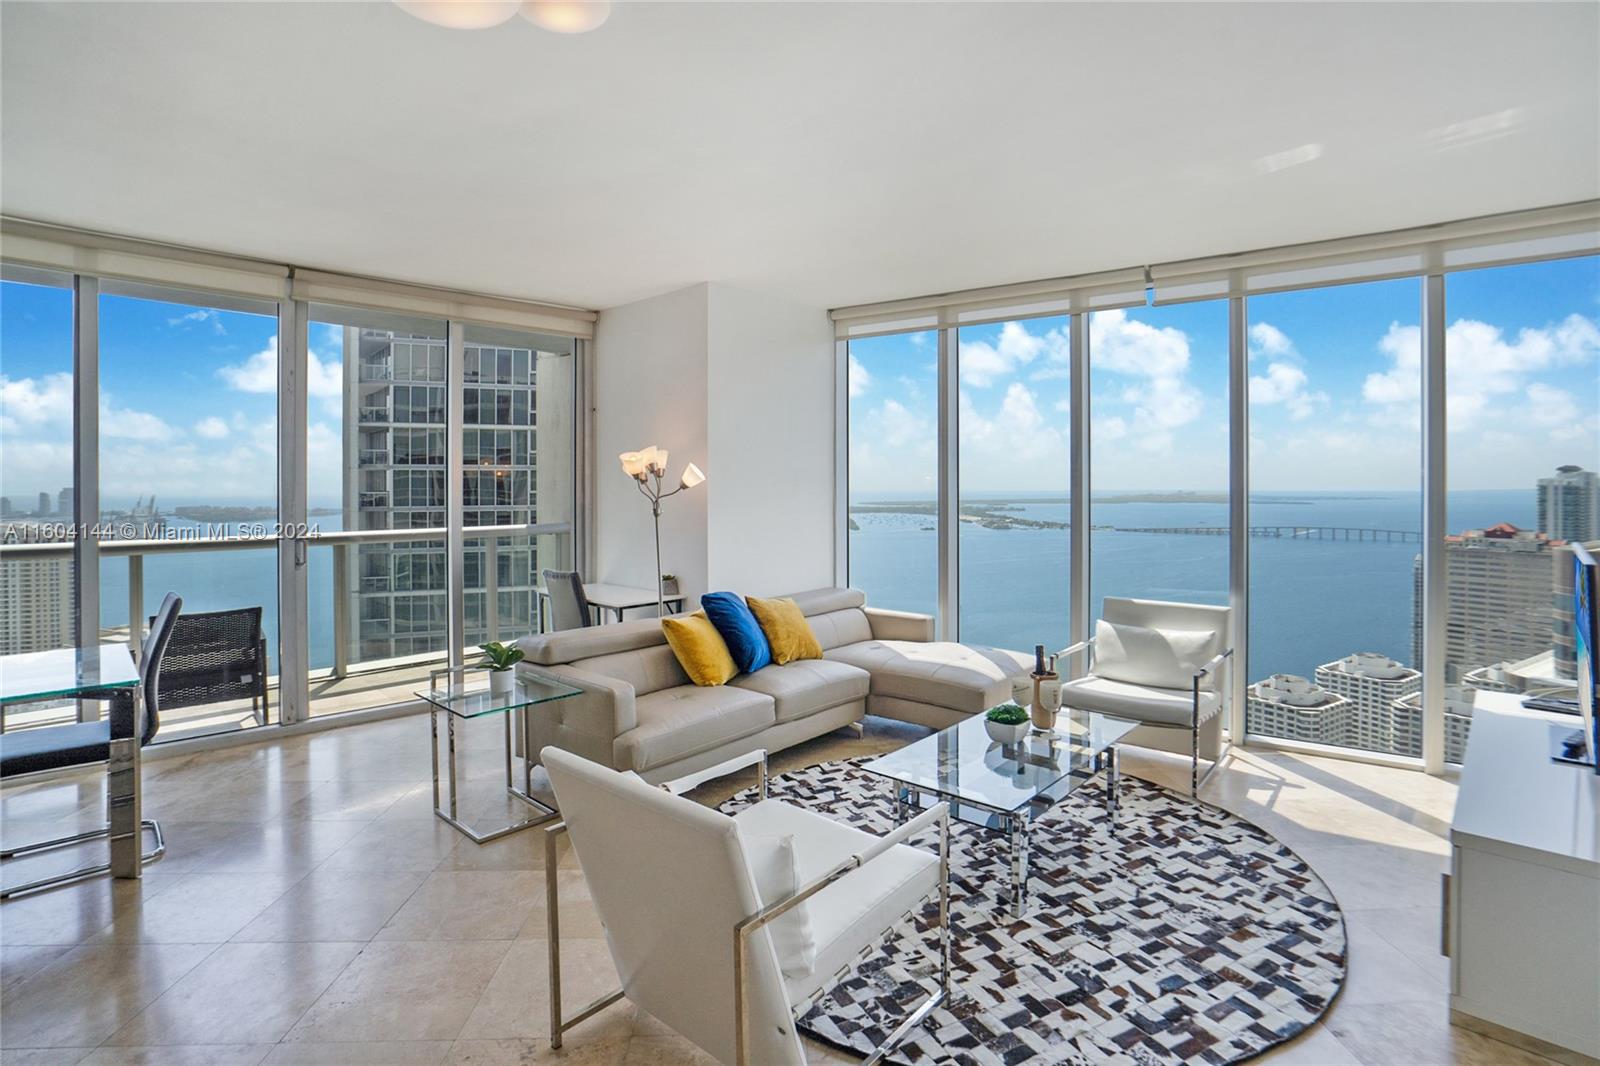 Huge, water-facing SE Corner Unit in the highly-sought after 10 Line of Icon Brickell near the very top of the building with Bay views all the way to Key Biscayne. Open Kitchen flowing into the Living Area with floor-to-ceiling windows along the entire SE corner of the unit, offering water views as far as the eye can see. Oversized corner balcony directly overlooking the rooftop pool, Biscayne Bay, and Miami River. Enjoy the flexibility of being able to rent this unit Long-Term or Short-Term, including Airbnb, as nightly rentals are permitted. Walking distance to the best shopping, dining, and nightlife in Brickell, including the new Sexy Fish and Brickell City Center right across the street. Multiple restaurants on-site, including Cipriani. 15 min to beach and airport.